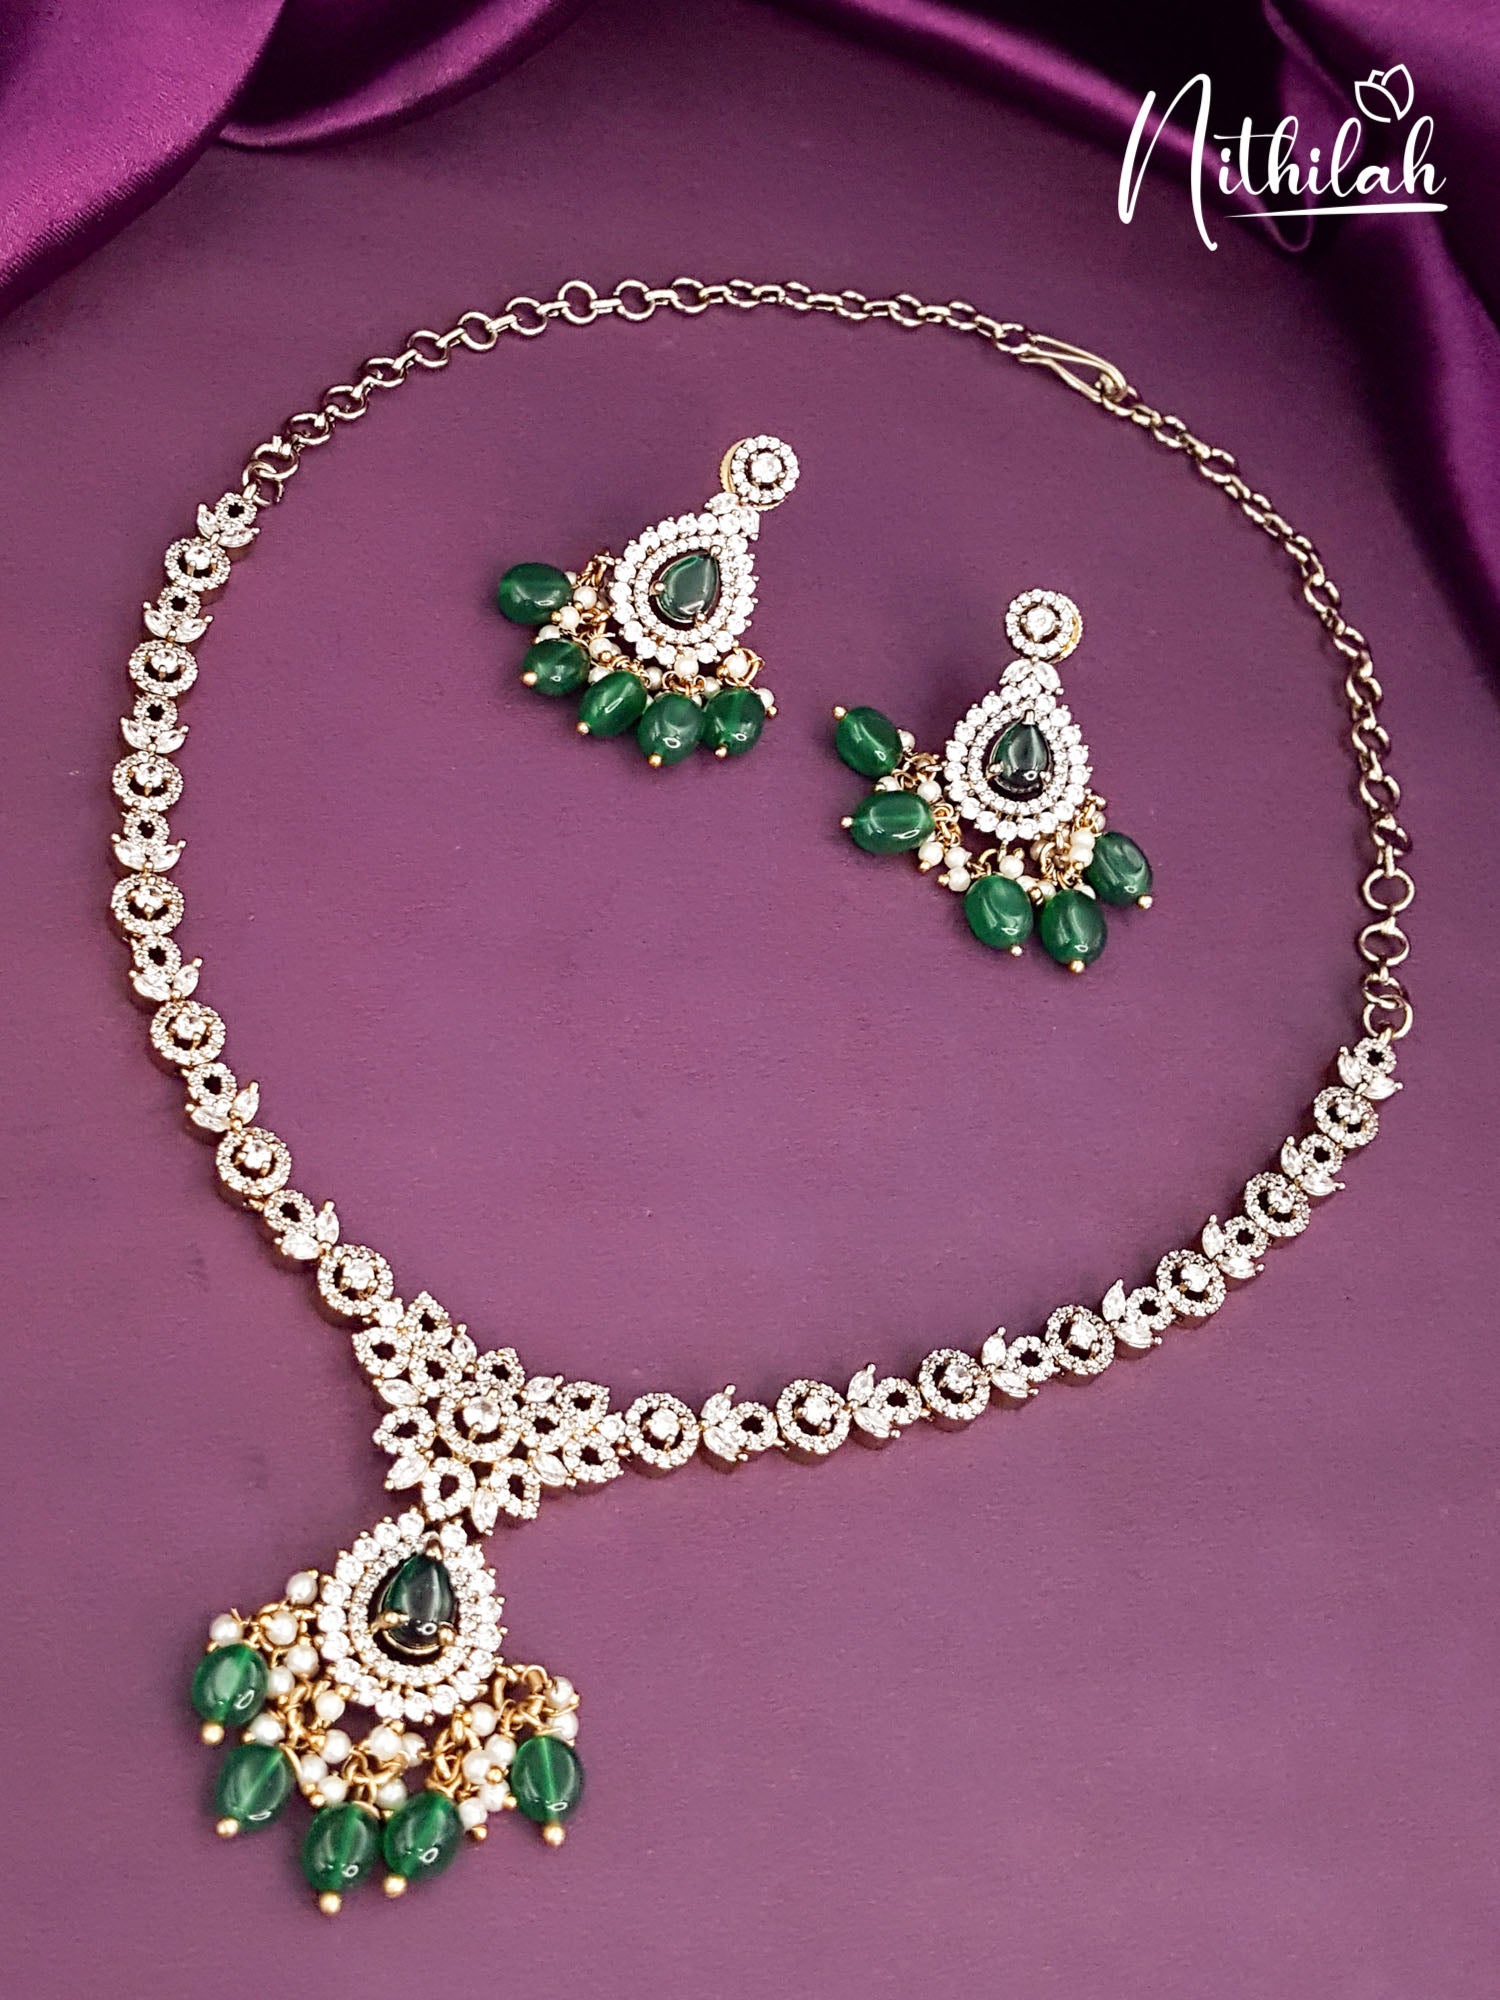 AMERICAN DIAMOND VICTORIAN NECKLACE SET WITH GREEN MOISSANITE BEAD